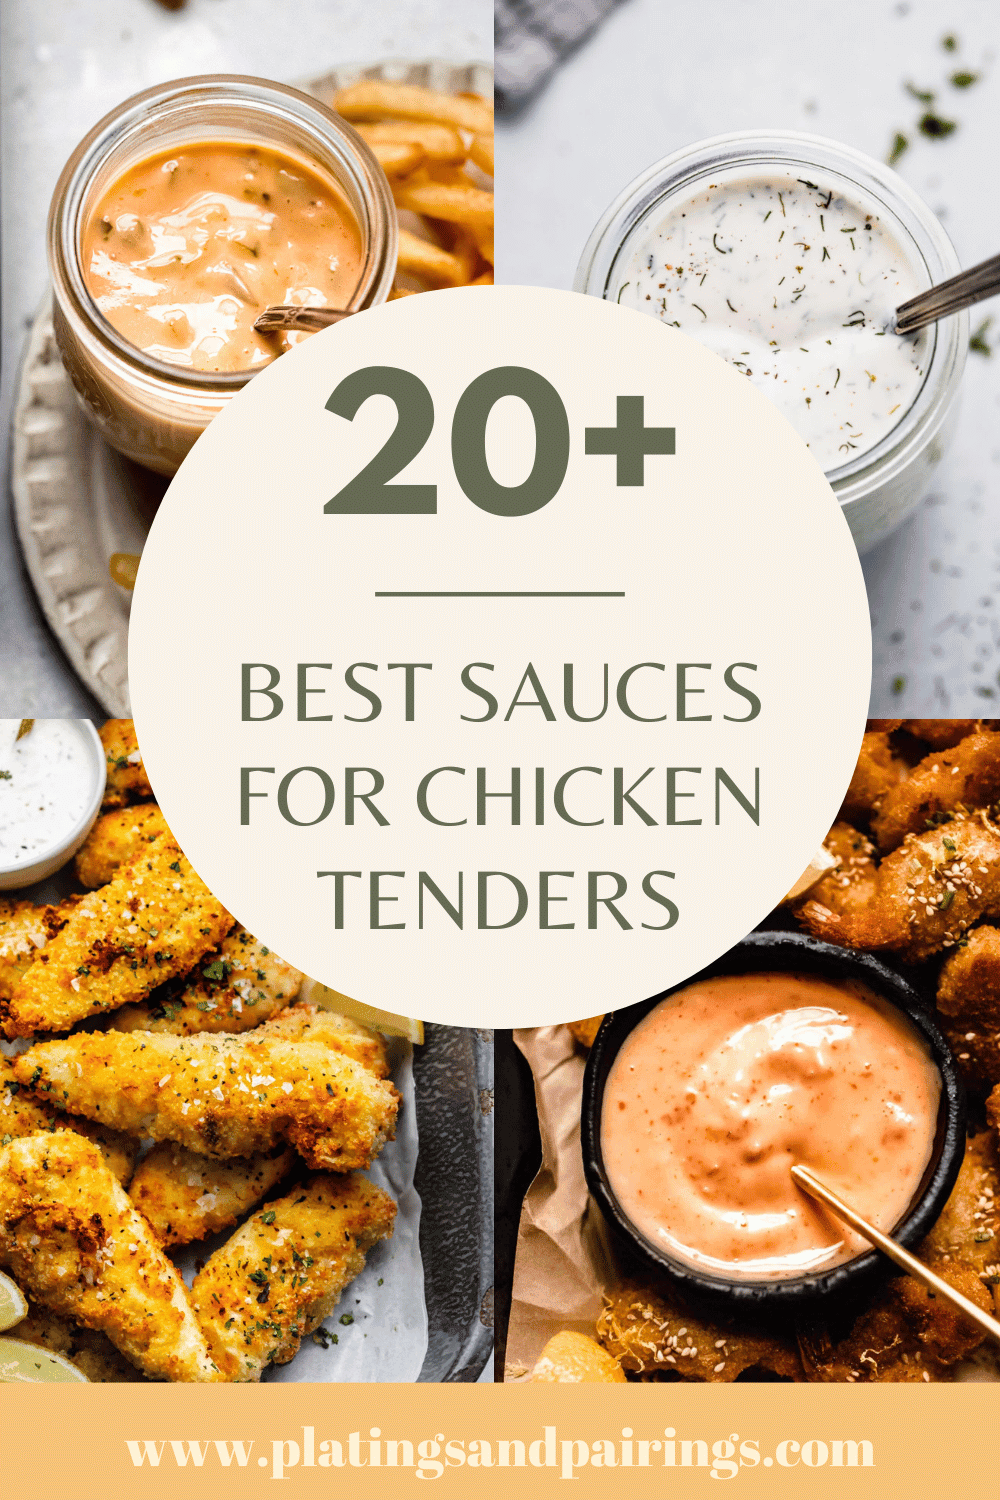 Collage of sauces for chicken tenders with text overlay.